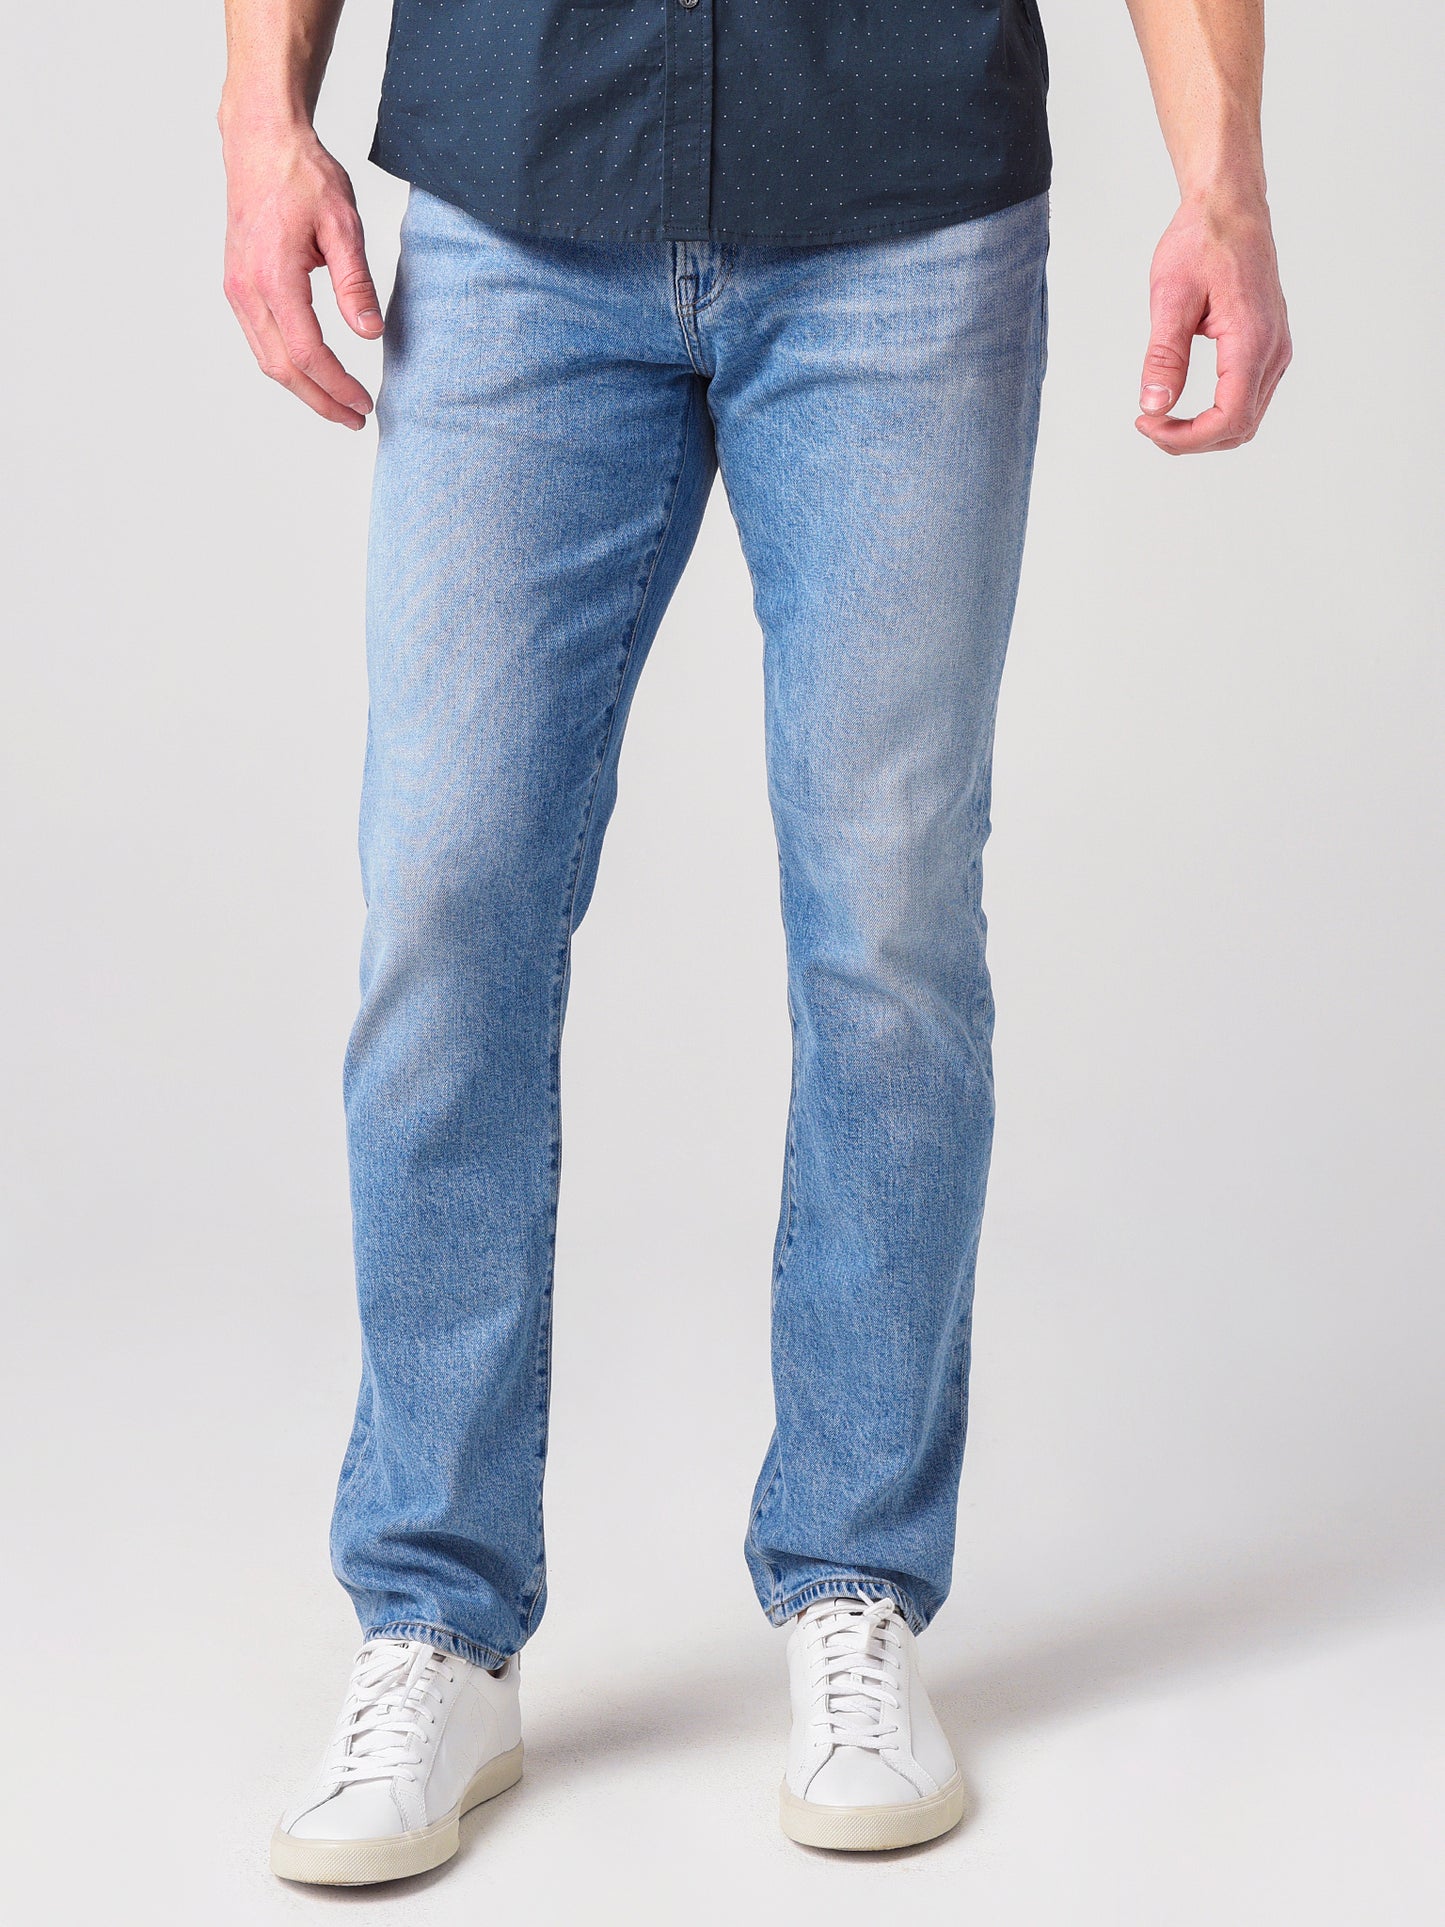 Citizens Of Humanity Men's Gage Classic Straight Jean